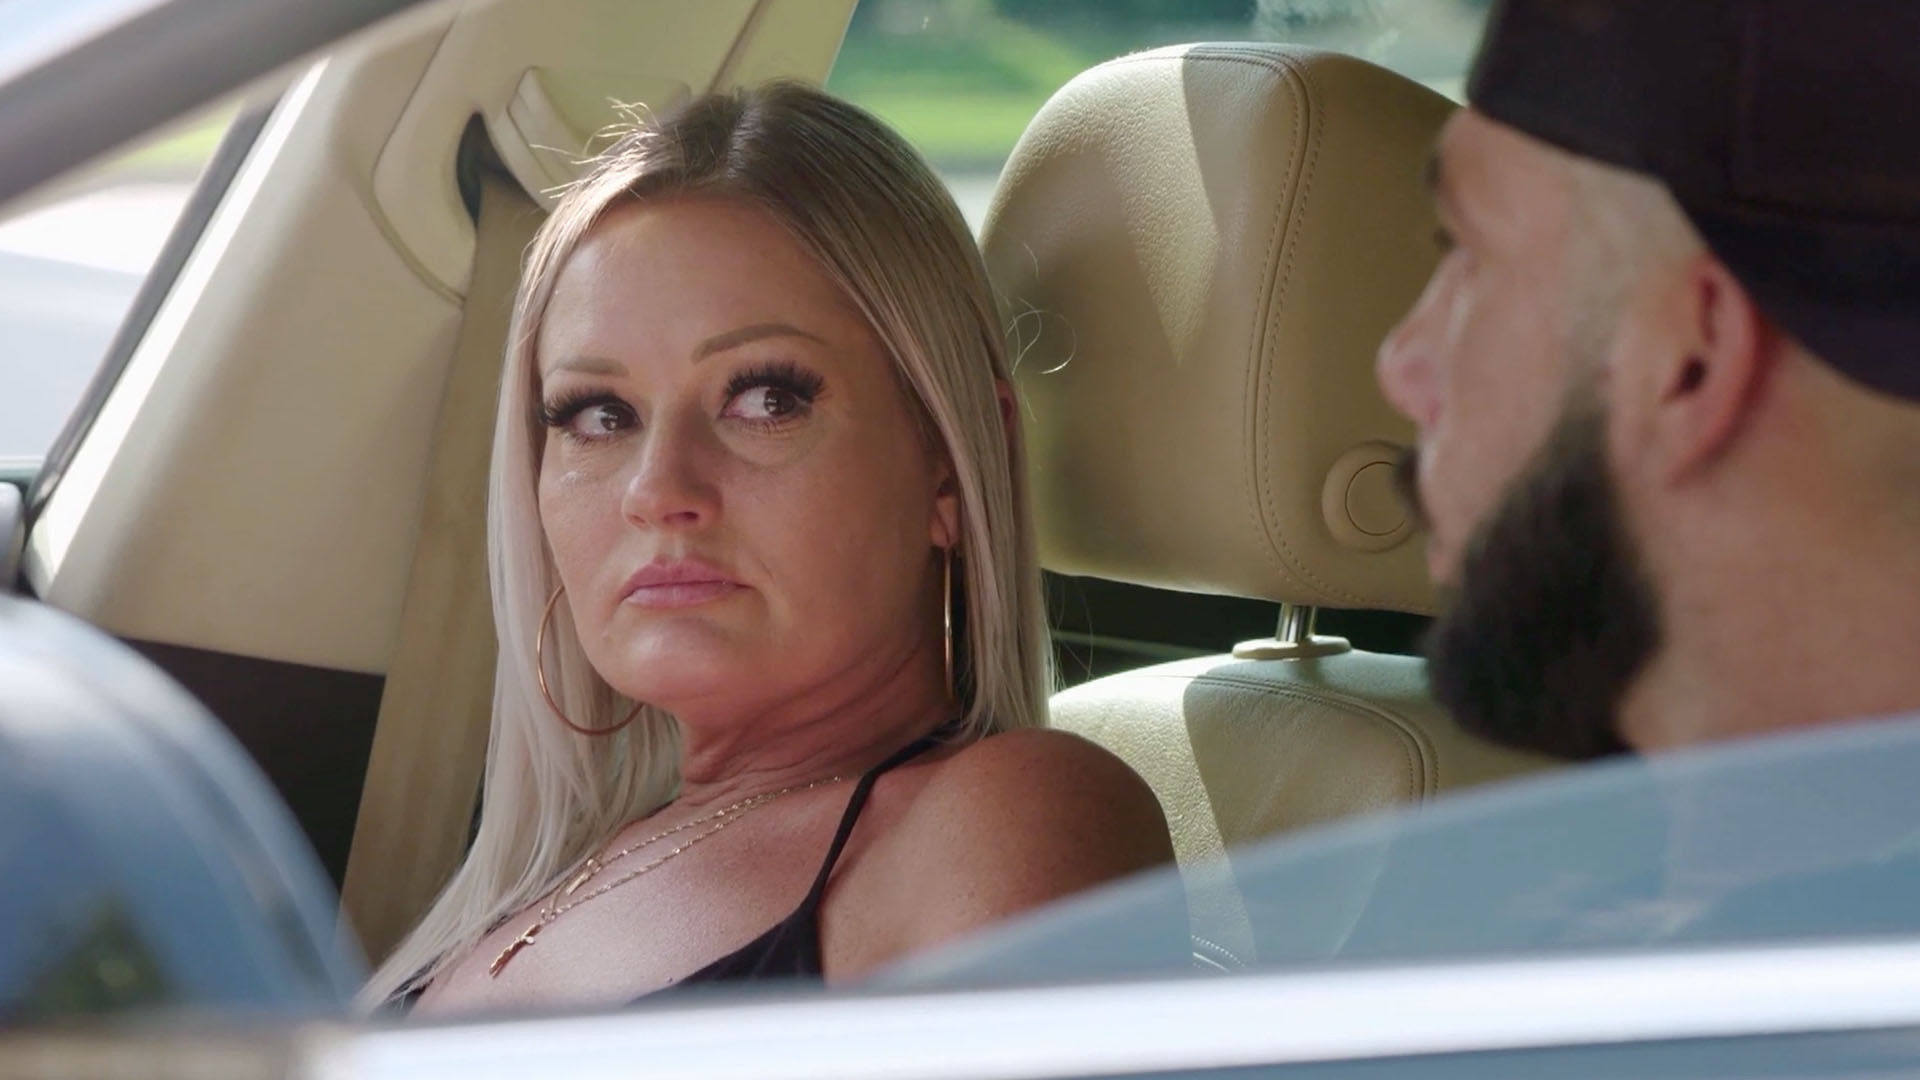 Watch Kayla Confronts Kevin! | Life After Lockup Video Extras